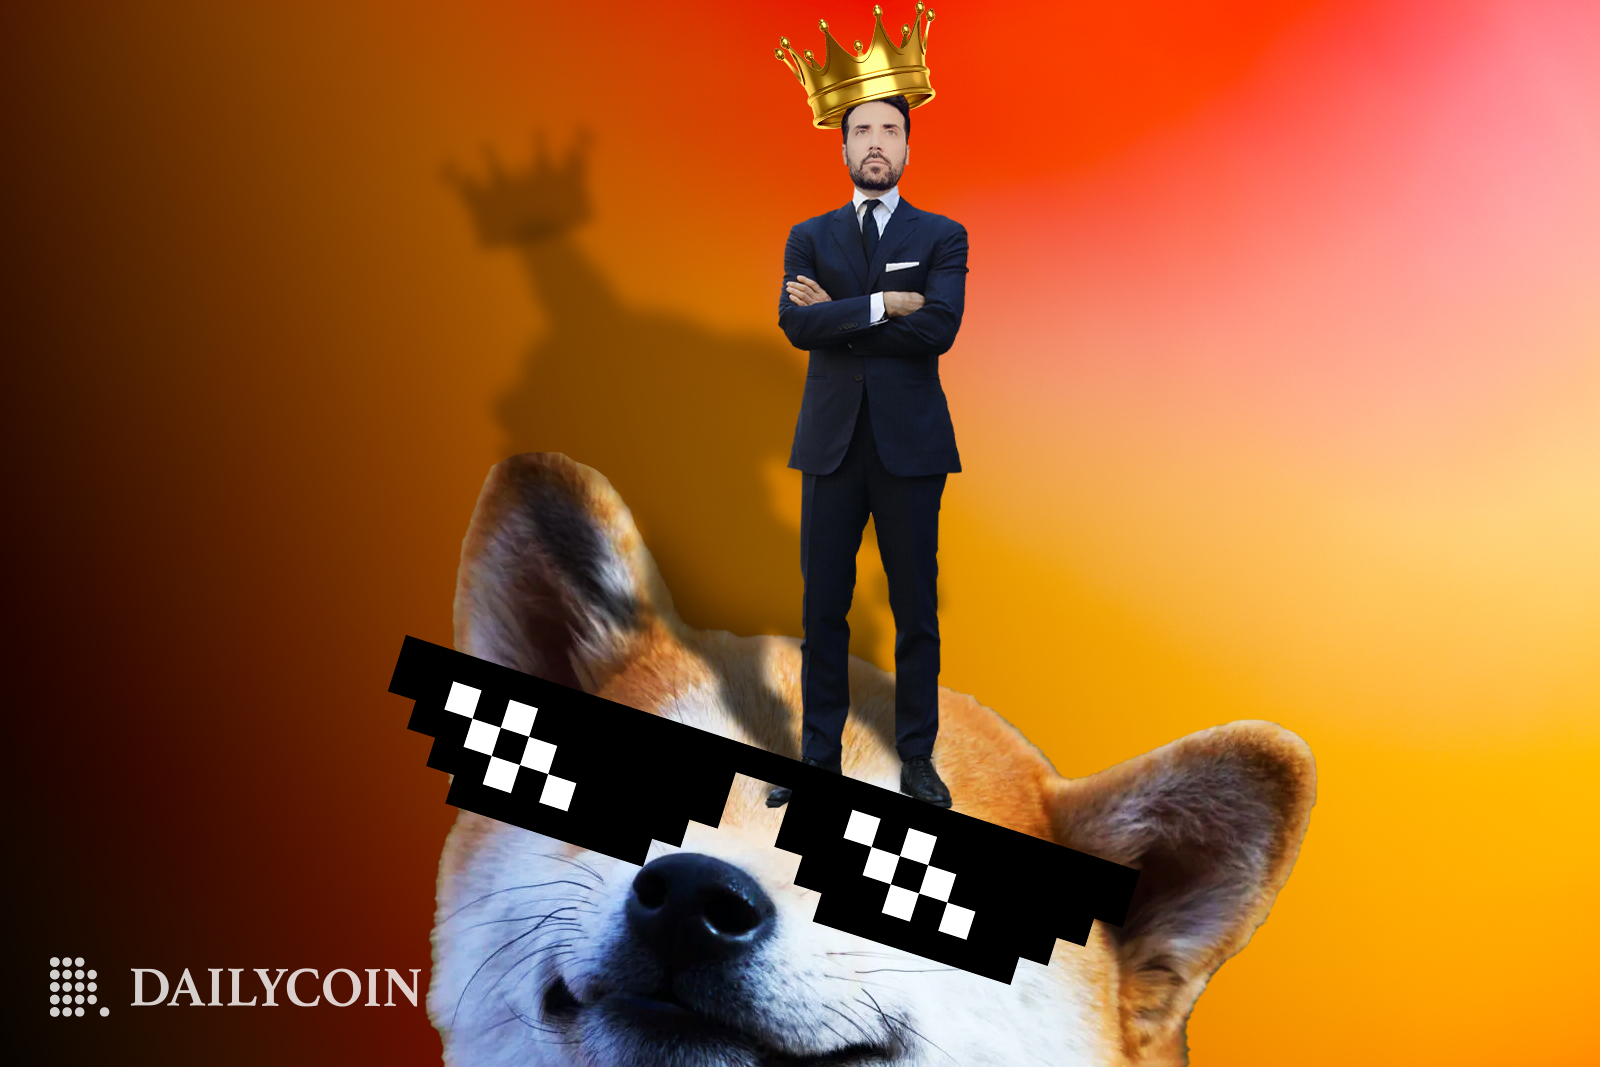 David Gokhshtein standing on Doge with sunglasses while wearing a crown.